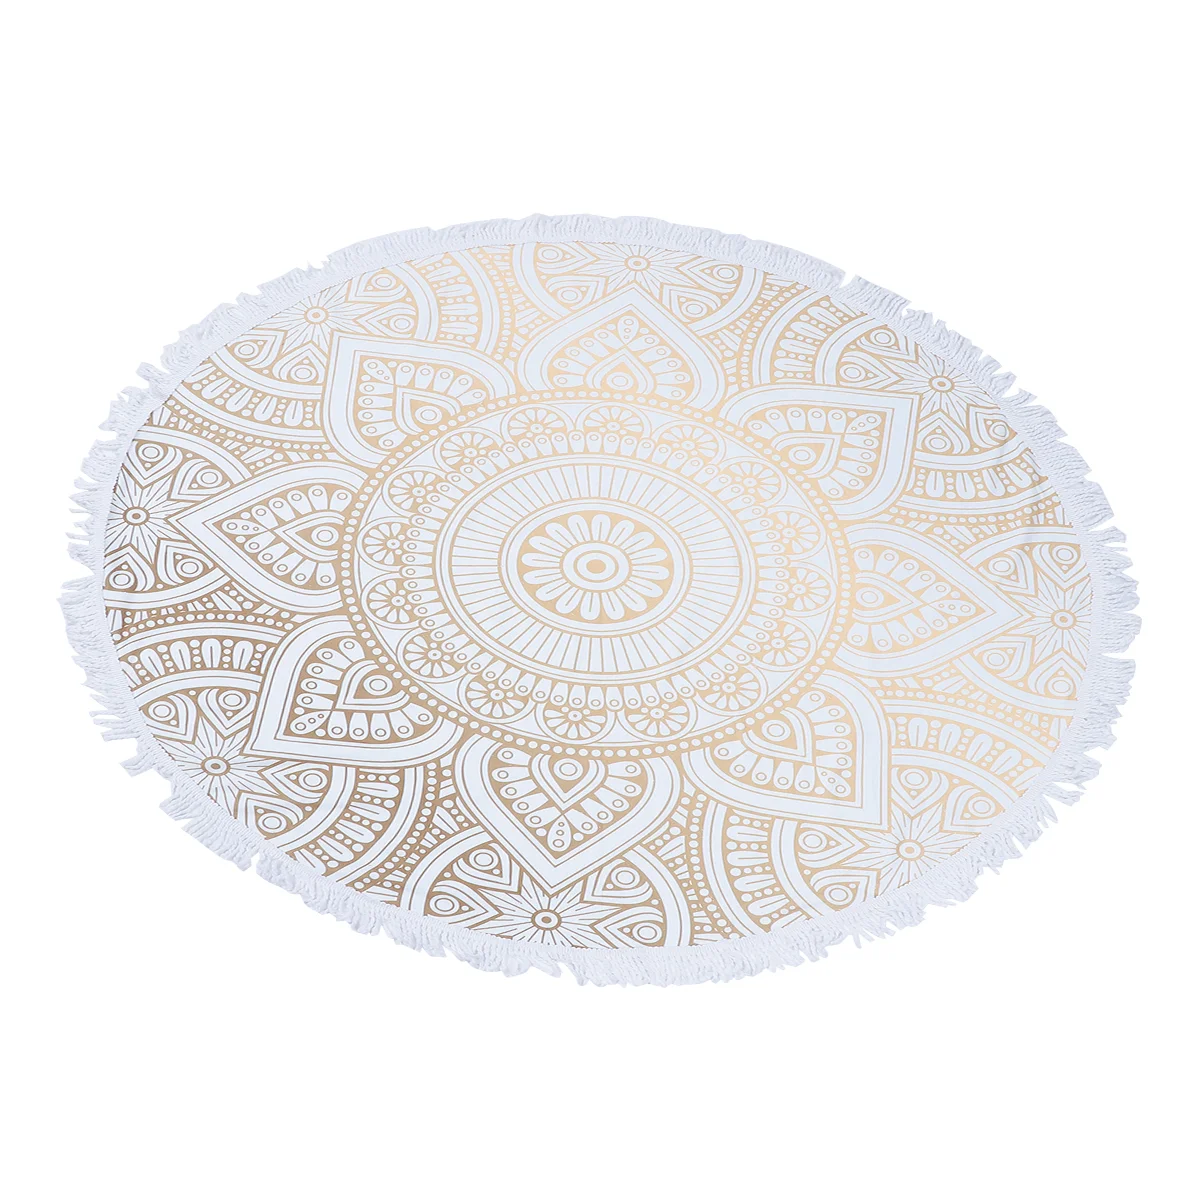 

Round Beach Blanket Mandala Tapestry Indian Picnic Table Cover Beach Towel Tassel Beach Cloths Beach Towels For Photo Background